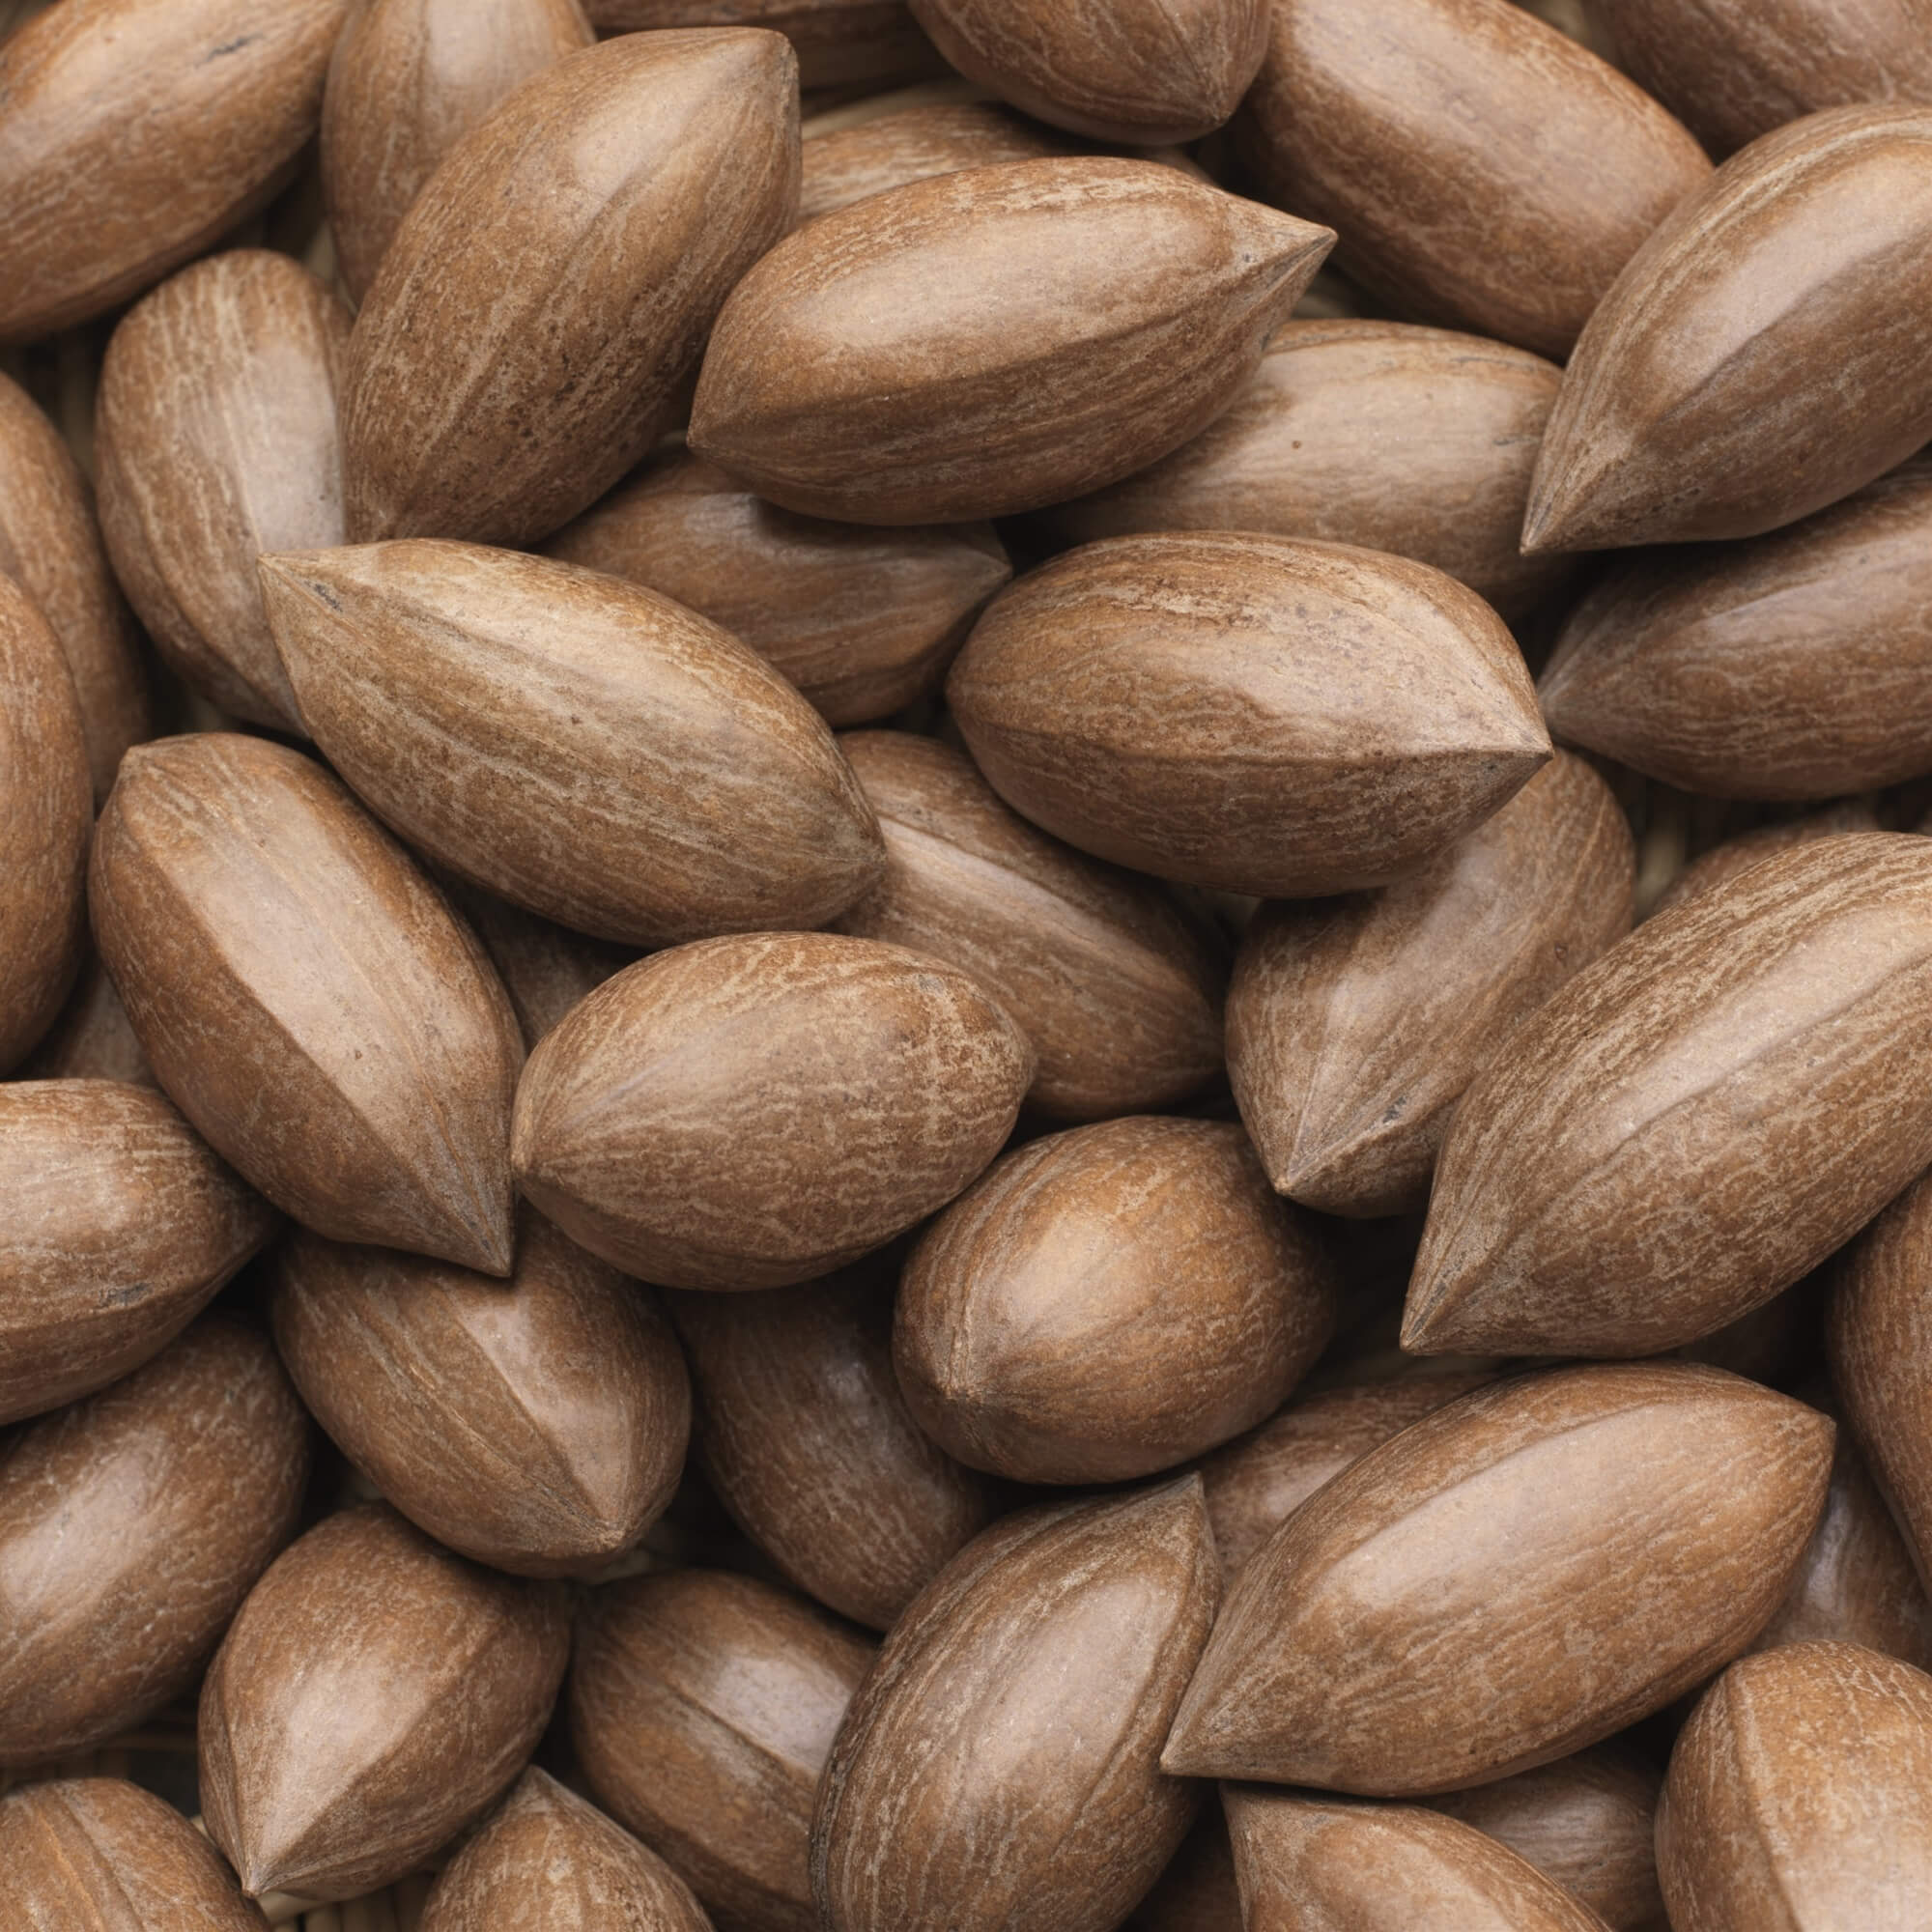 Pecan Nuts - A Pecan Nut is an edible nut encased in a brown shell with a tough outer green coat. They are mainly grown in Georgia, Texas, New Mexico and Oklahoma. 